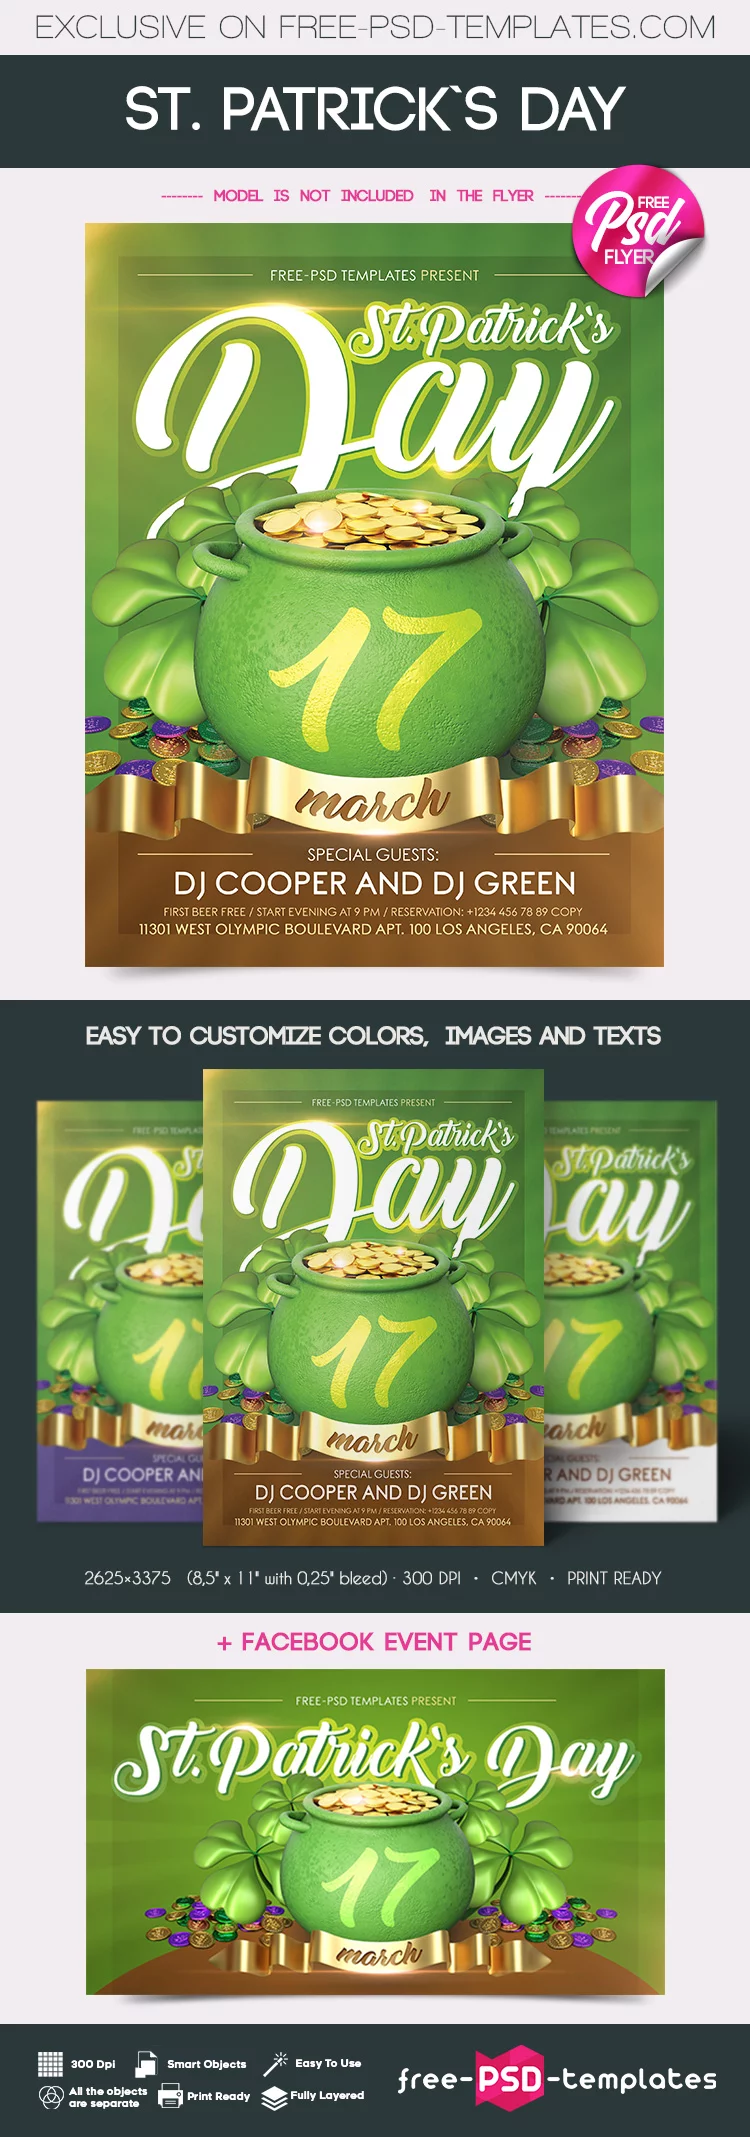 Free St. Patrick’s Day Flyer in PSD